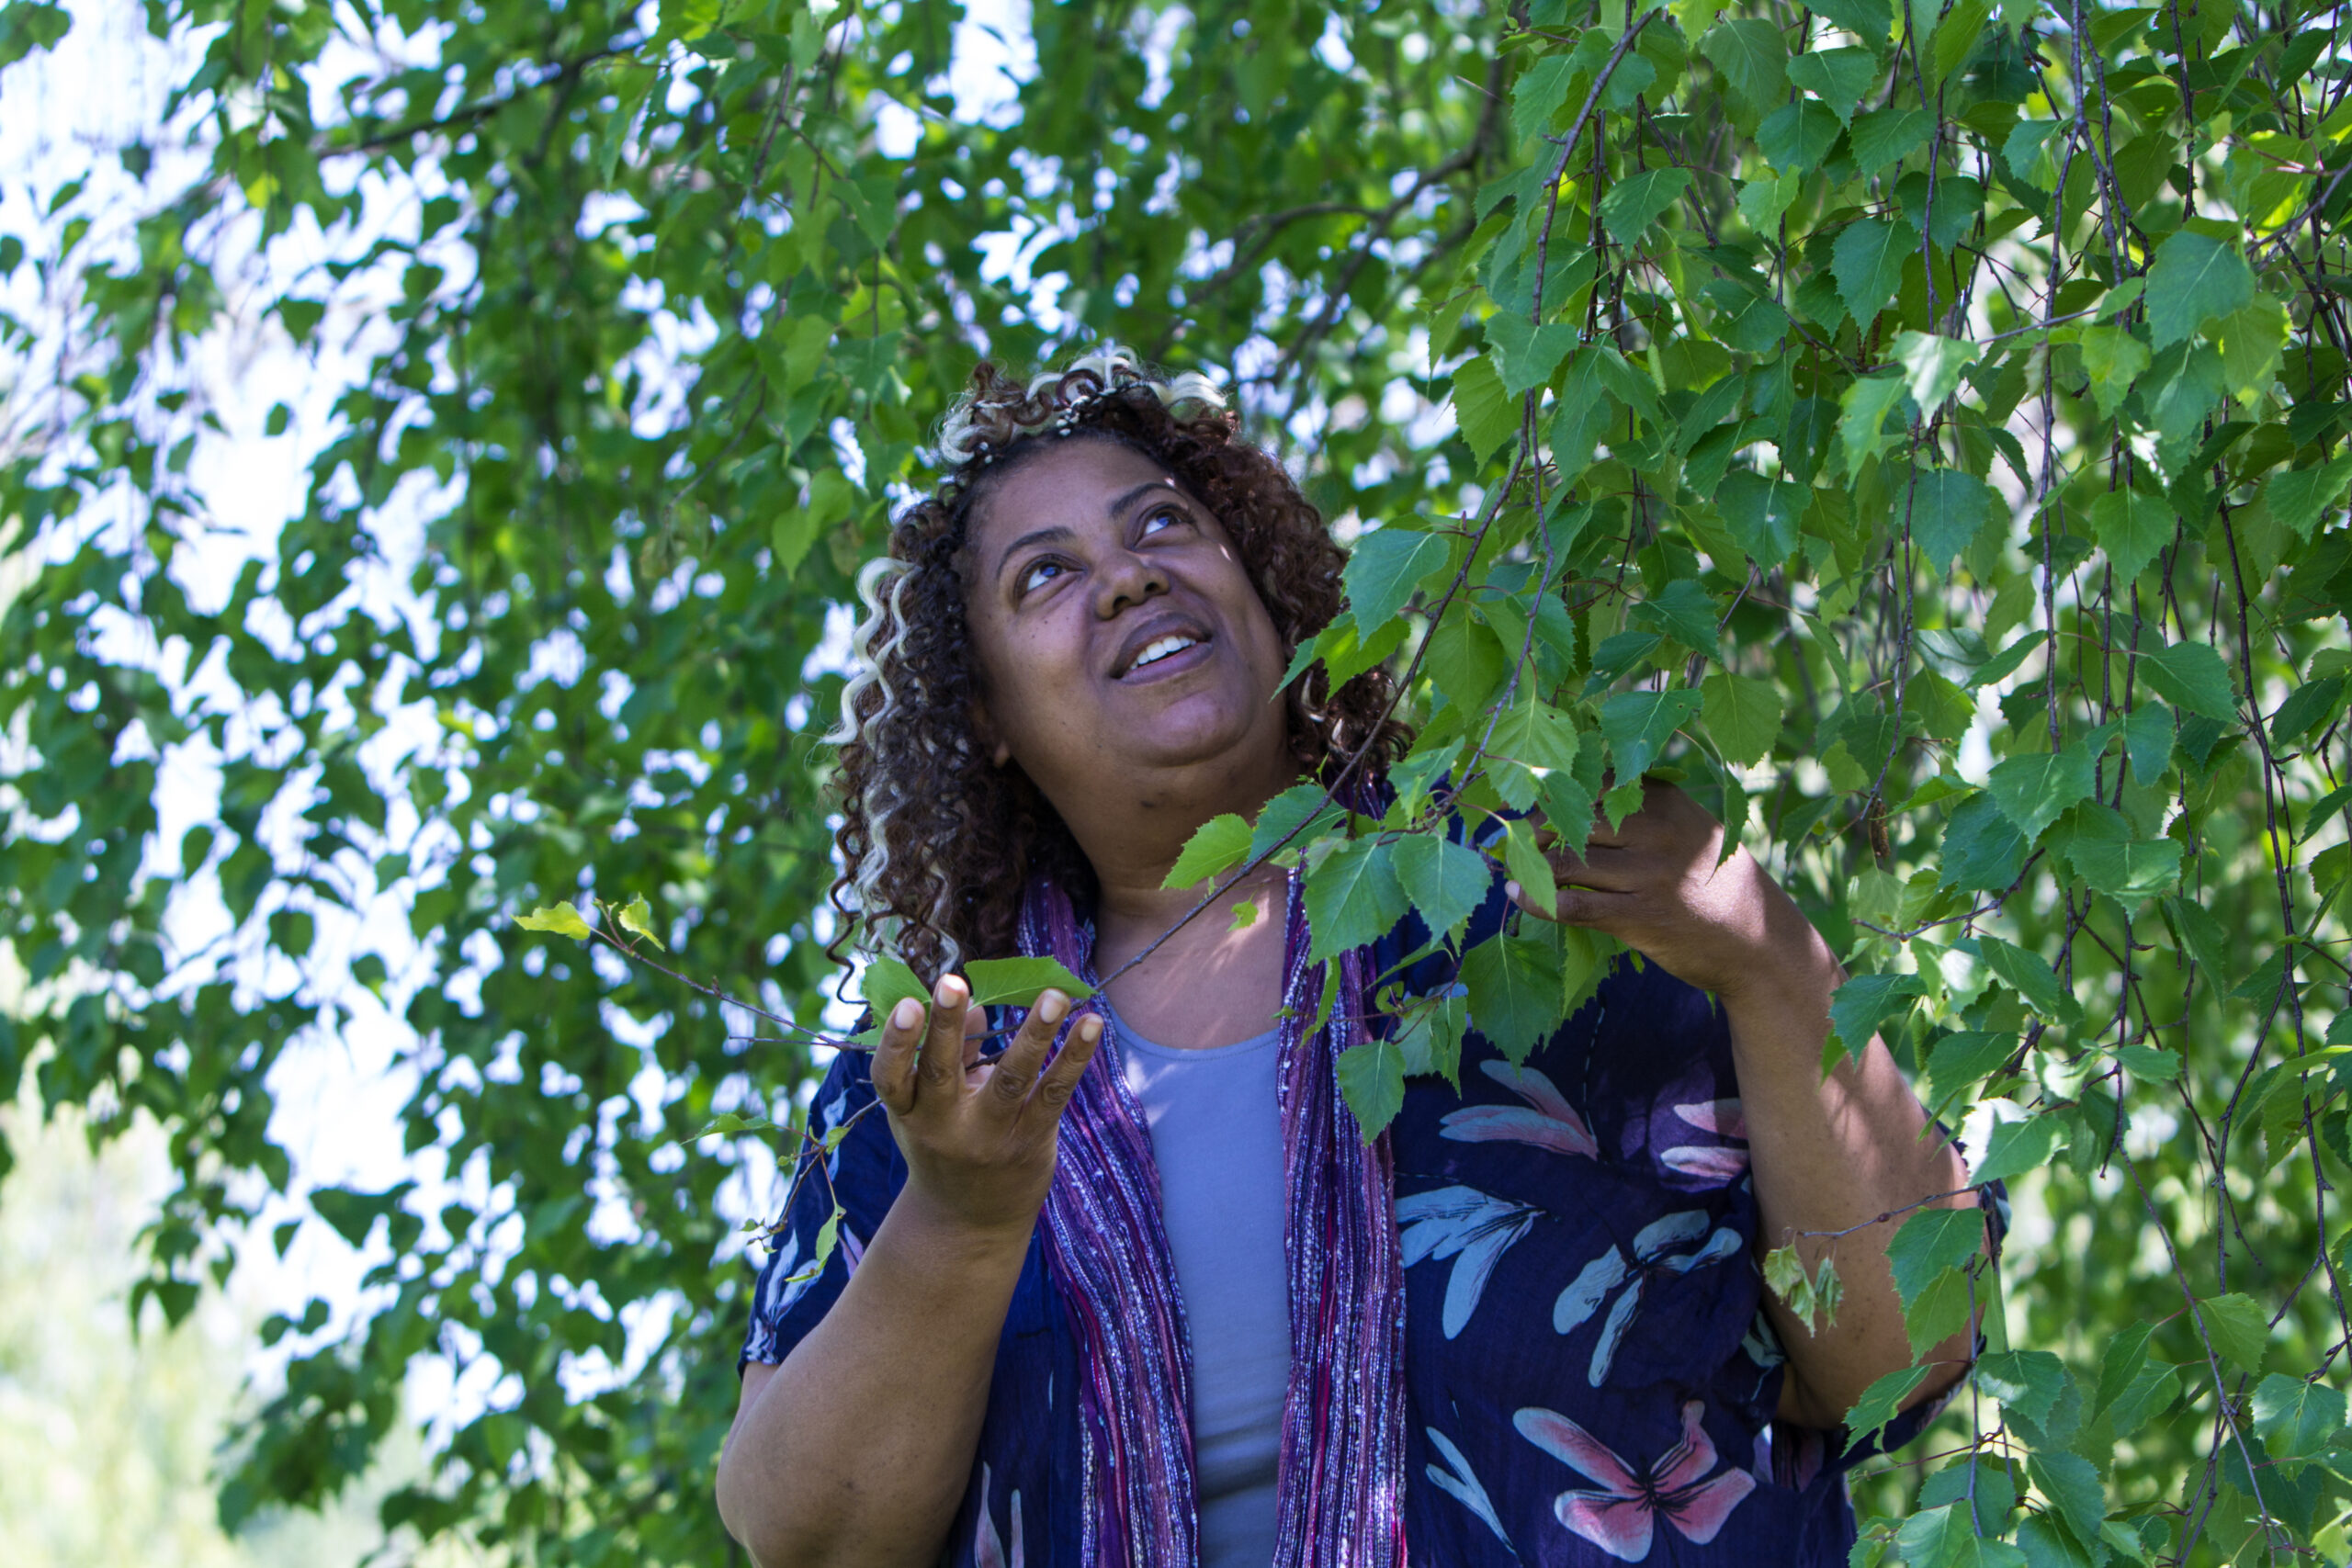 Siobhan Barker wearing a blue outfit, stands under a tree holding one of its branches full of green leaves gently, smiling upwards.